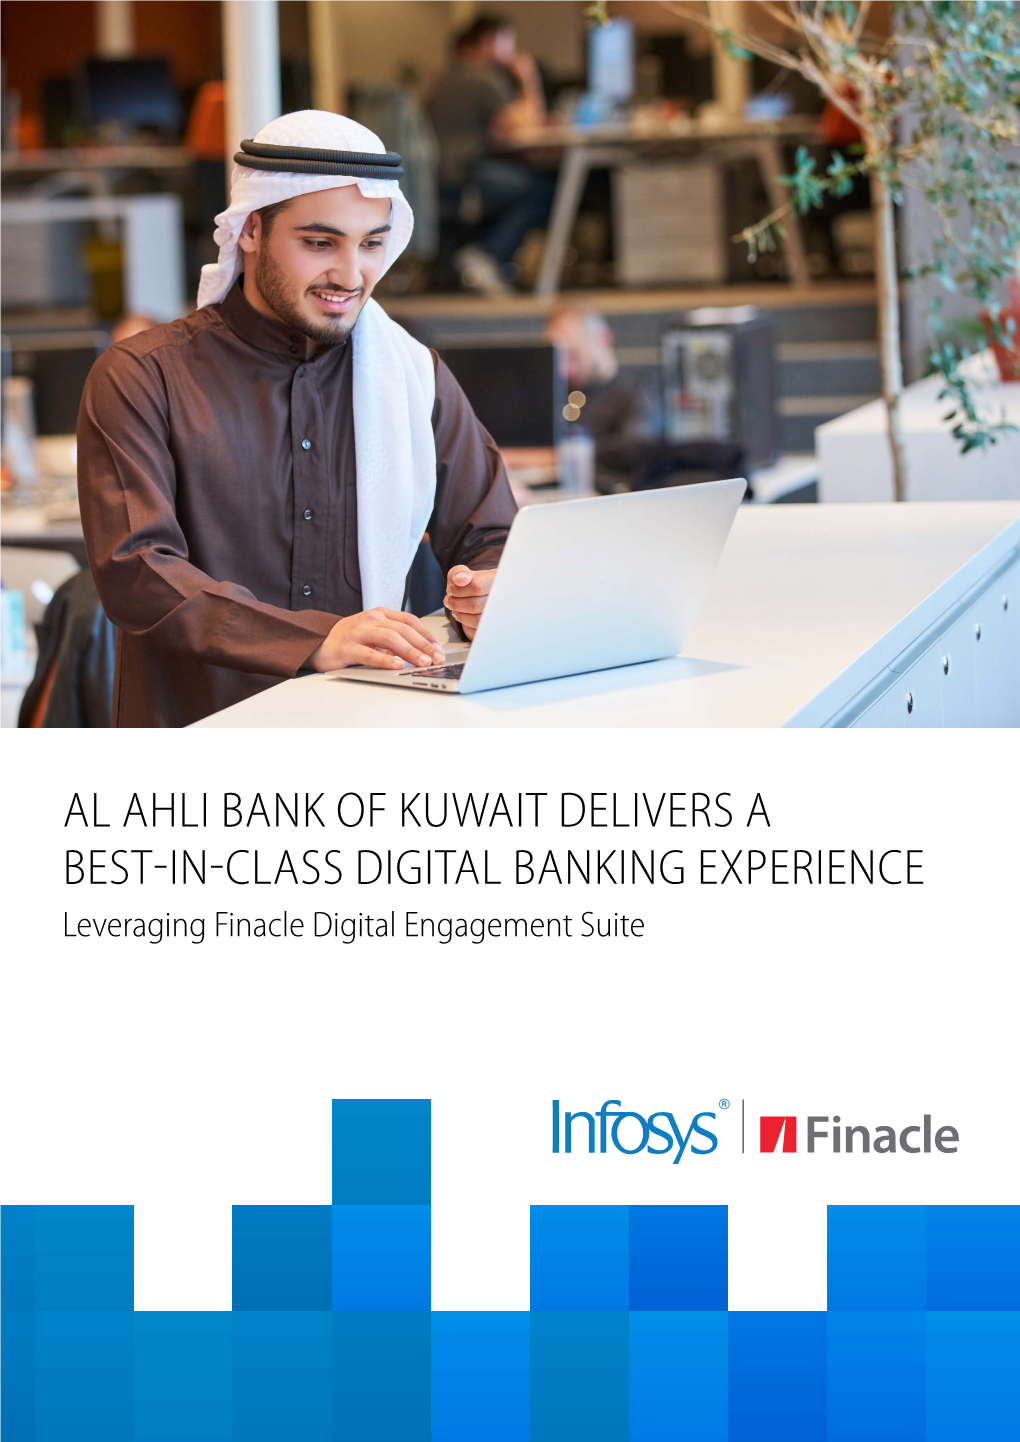 AL AHLI BANK of KUWAIT DELIVERS a BEST-IN-CLASS DIGITAL BANKING EXPERIENCE Leveraging Finacle Digital Engagement Suite Profile Solution Highlights